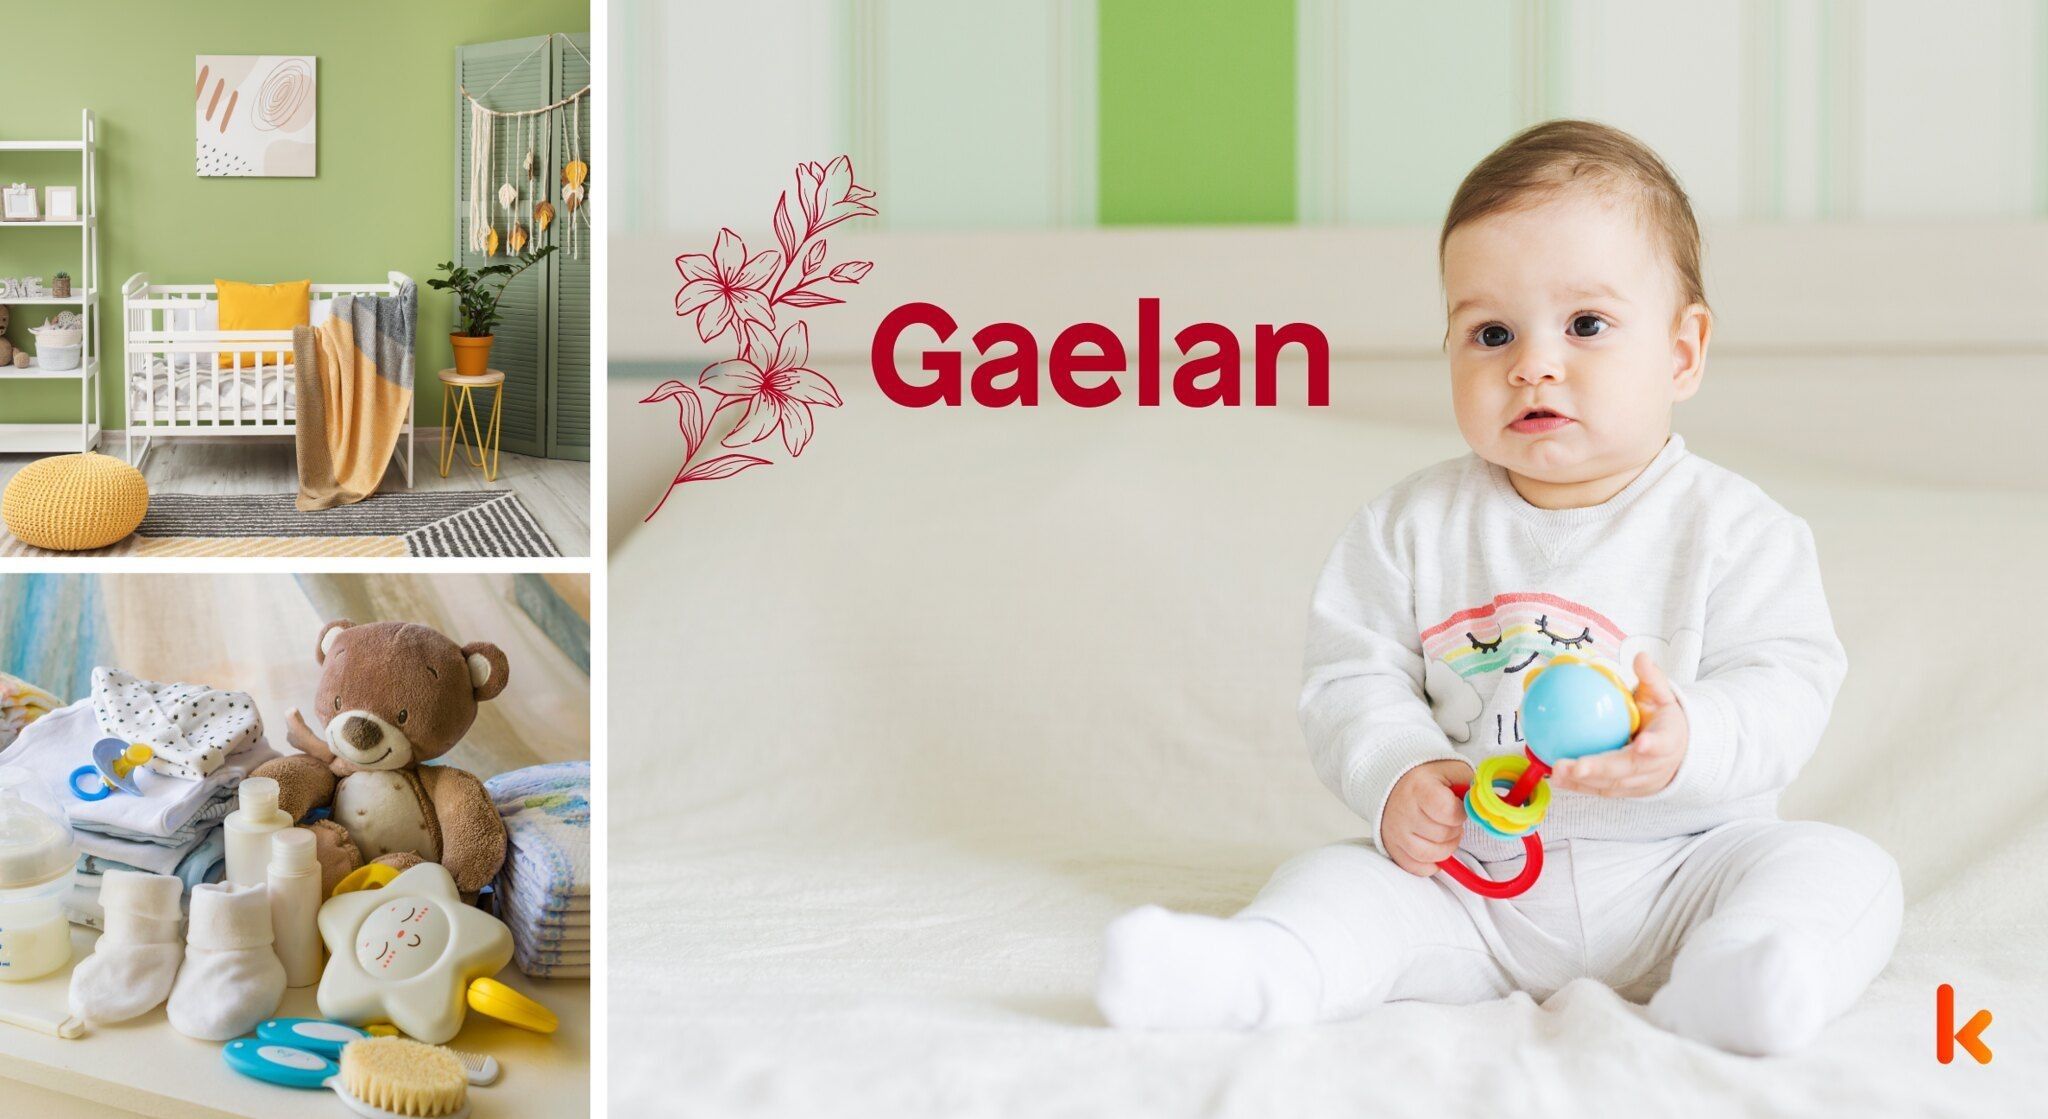 Meaning of the name Gaelan